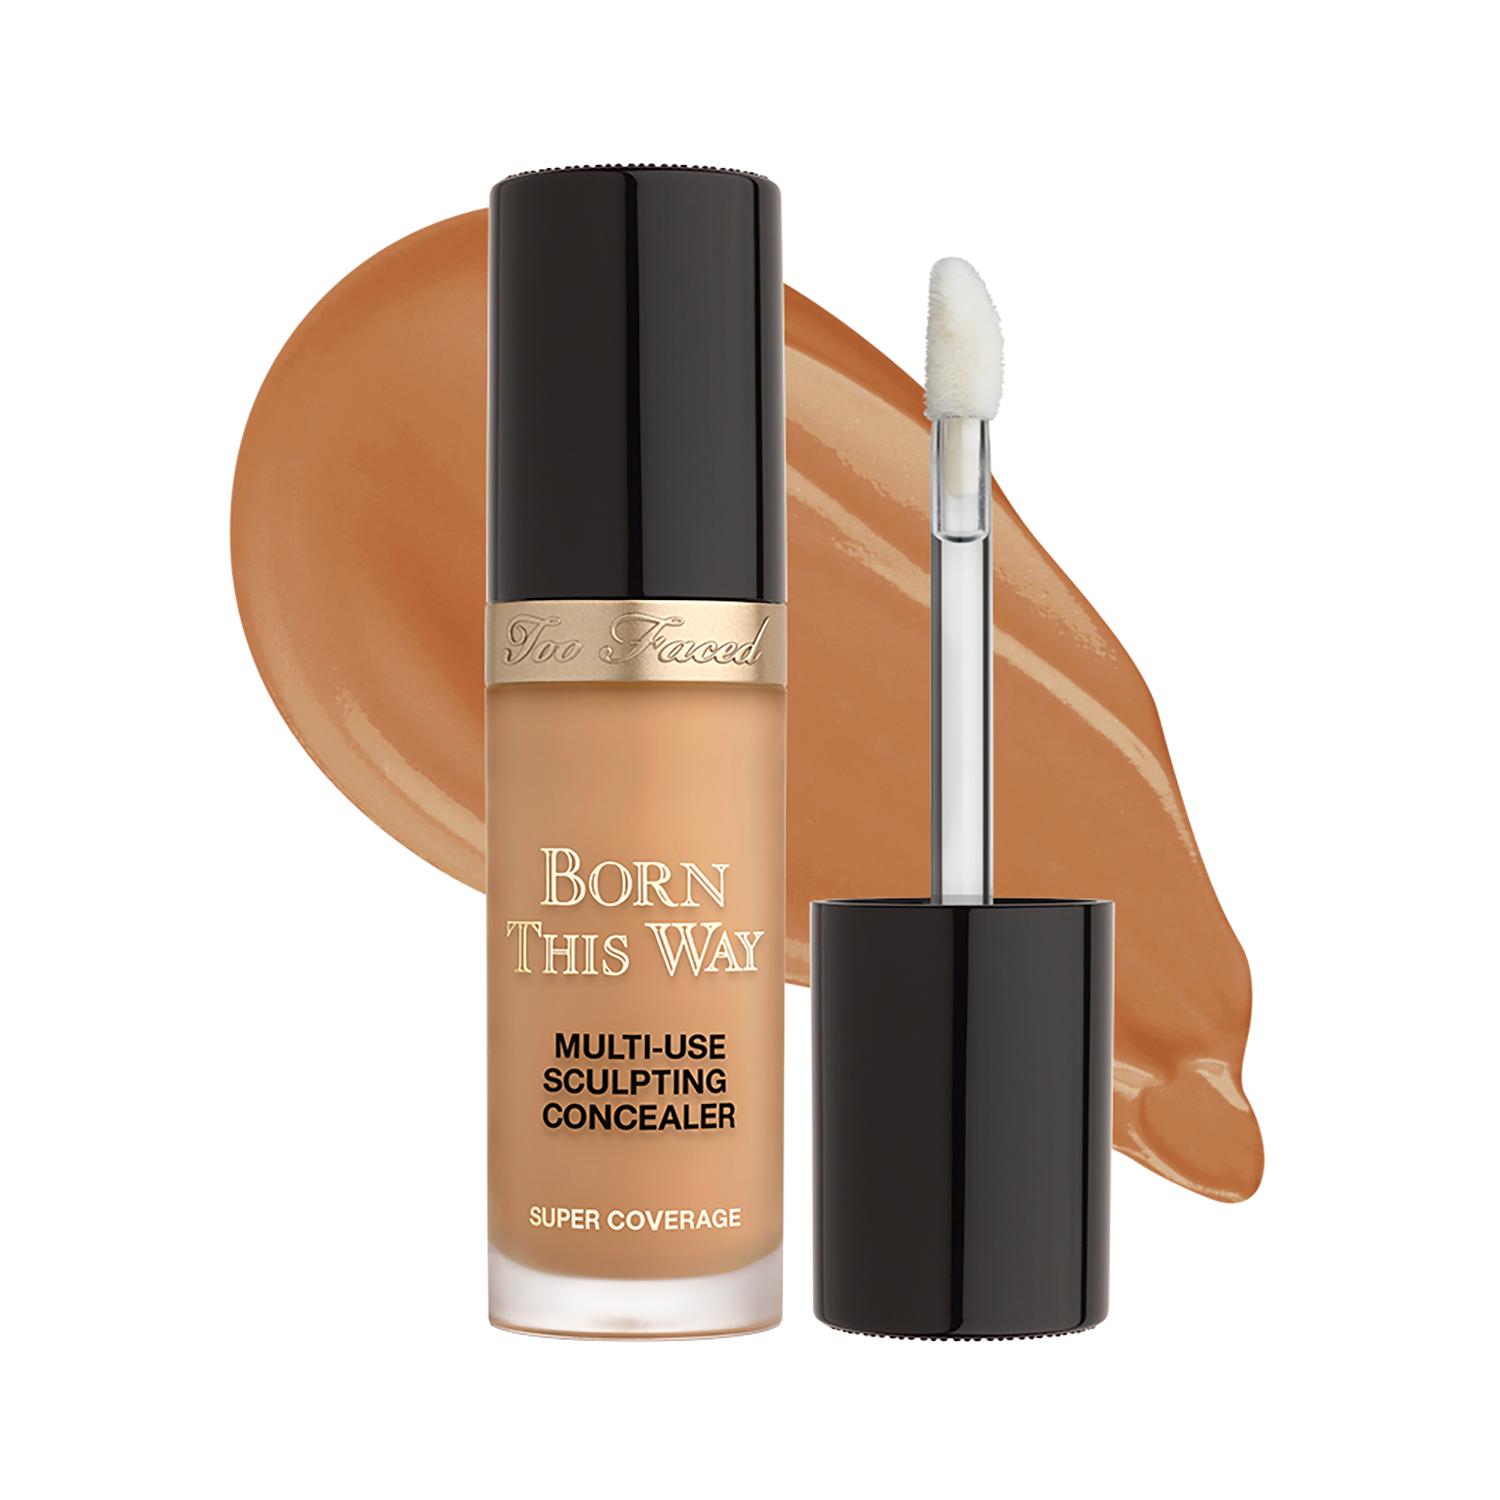 Too Faced | Too Faced Born This Way Super Coverage Multi Use Sculpting Concealer- Warm Sand (13.5ml)